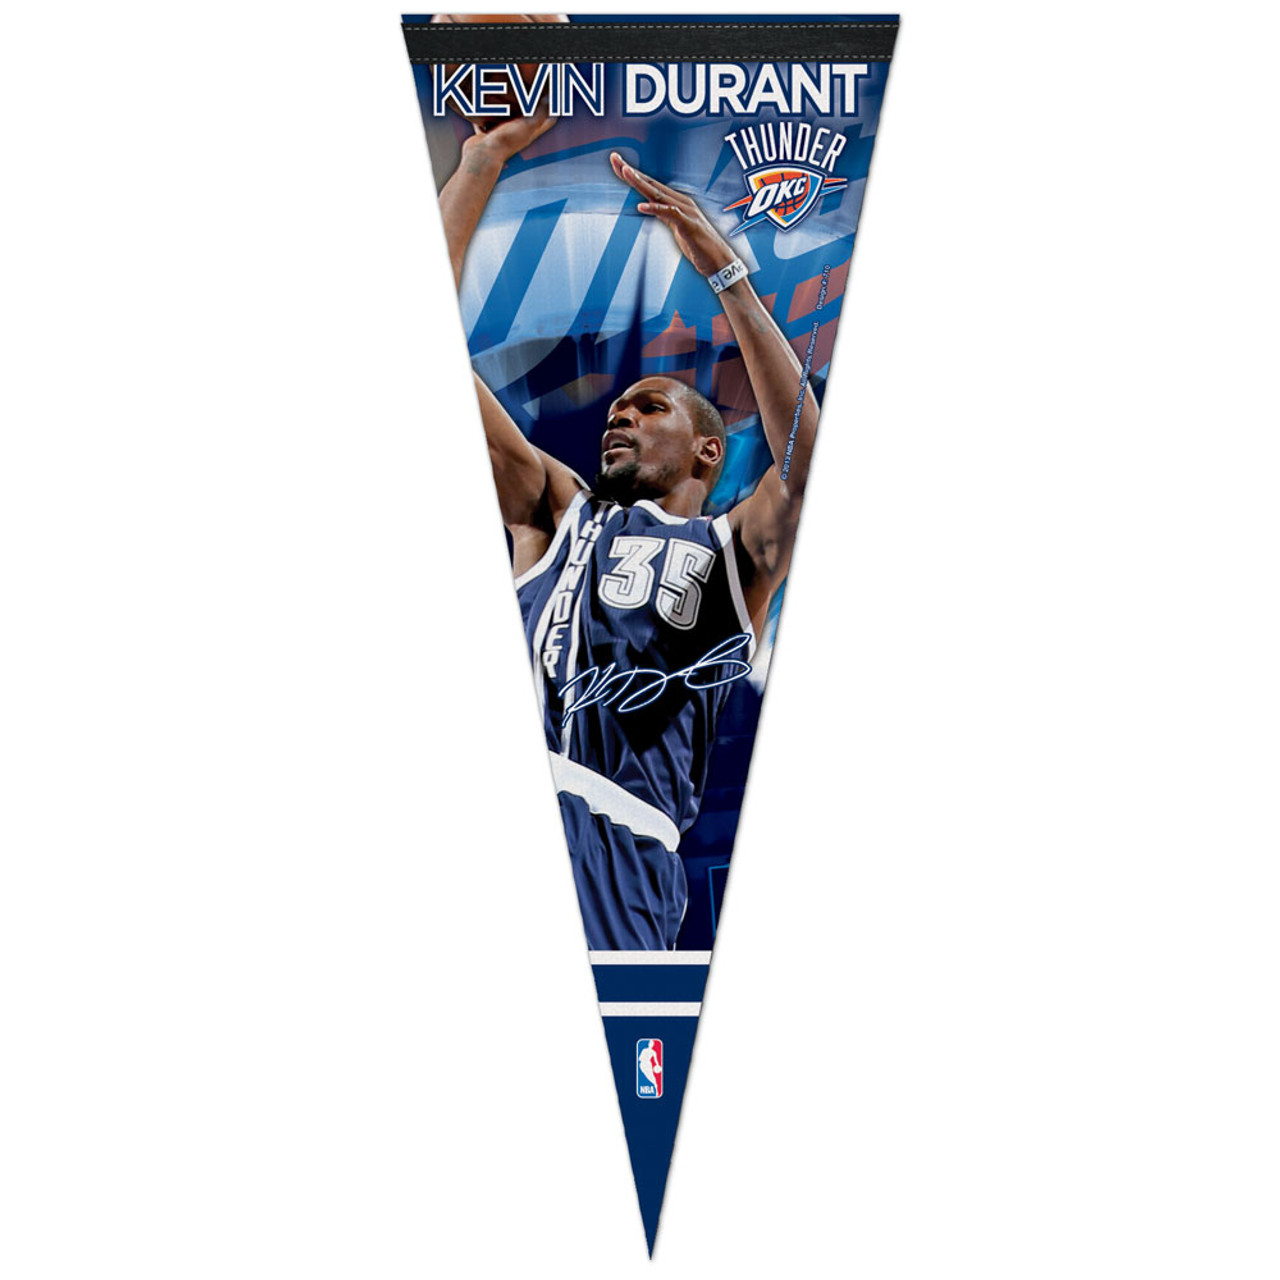 Kevin Durant OKC Throwback Jersey for Sale in Philadelphia, PA